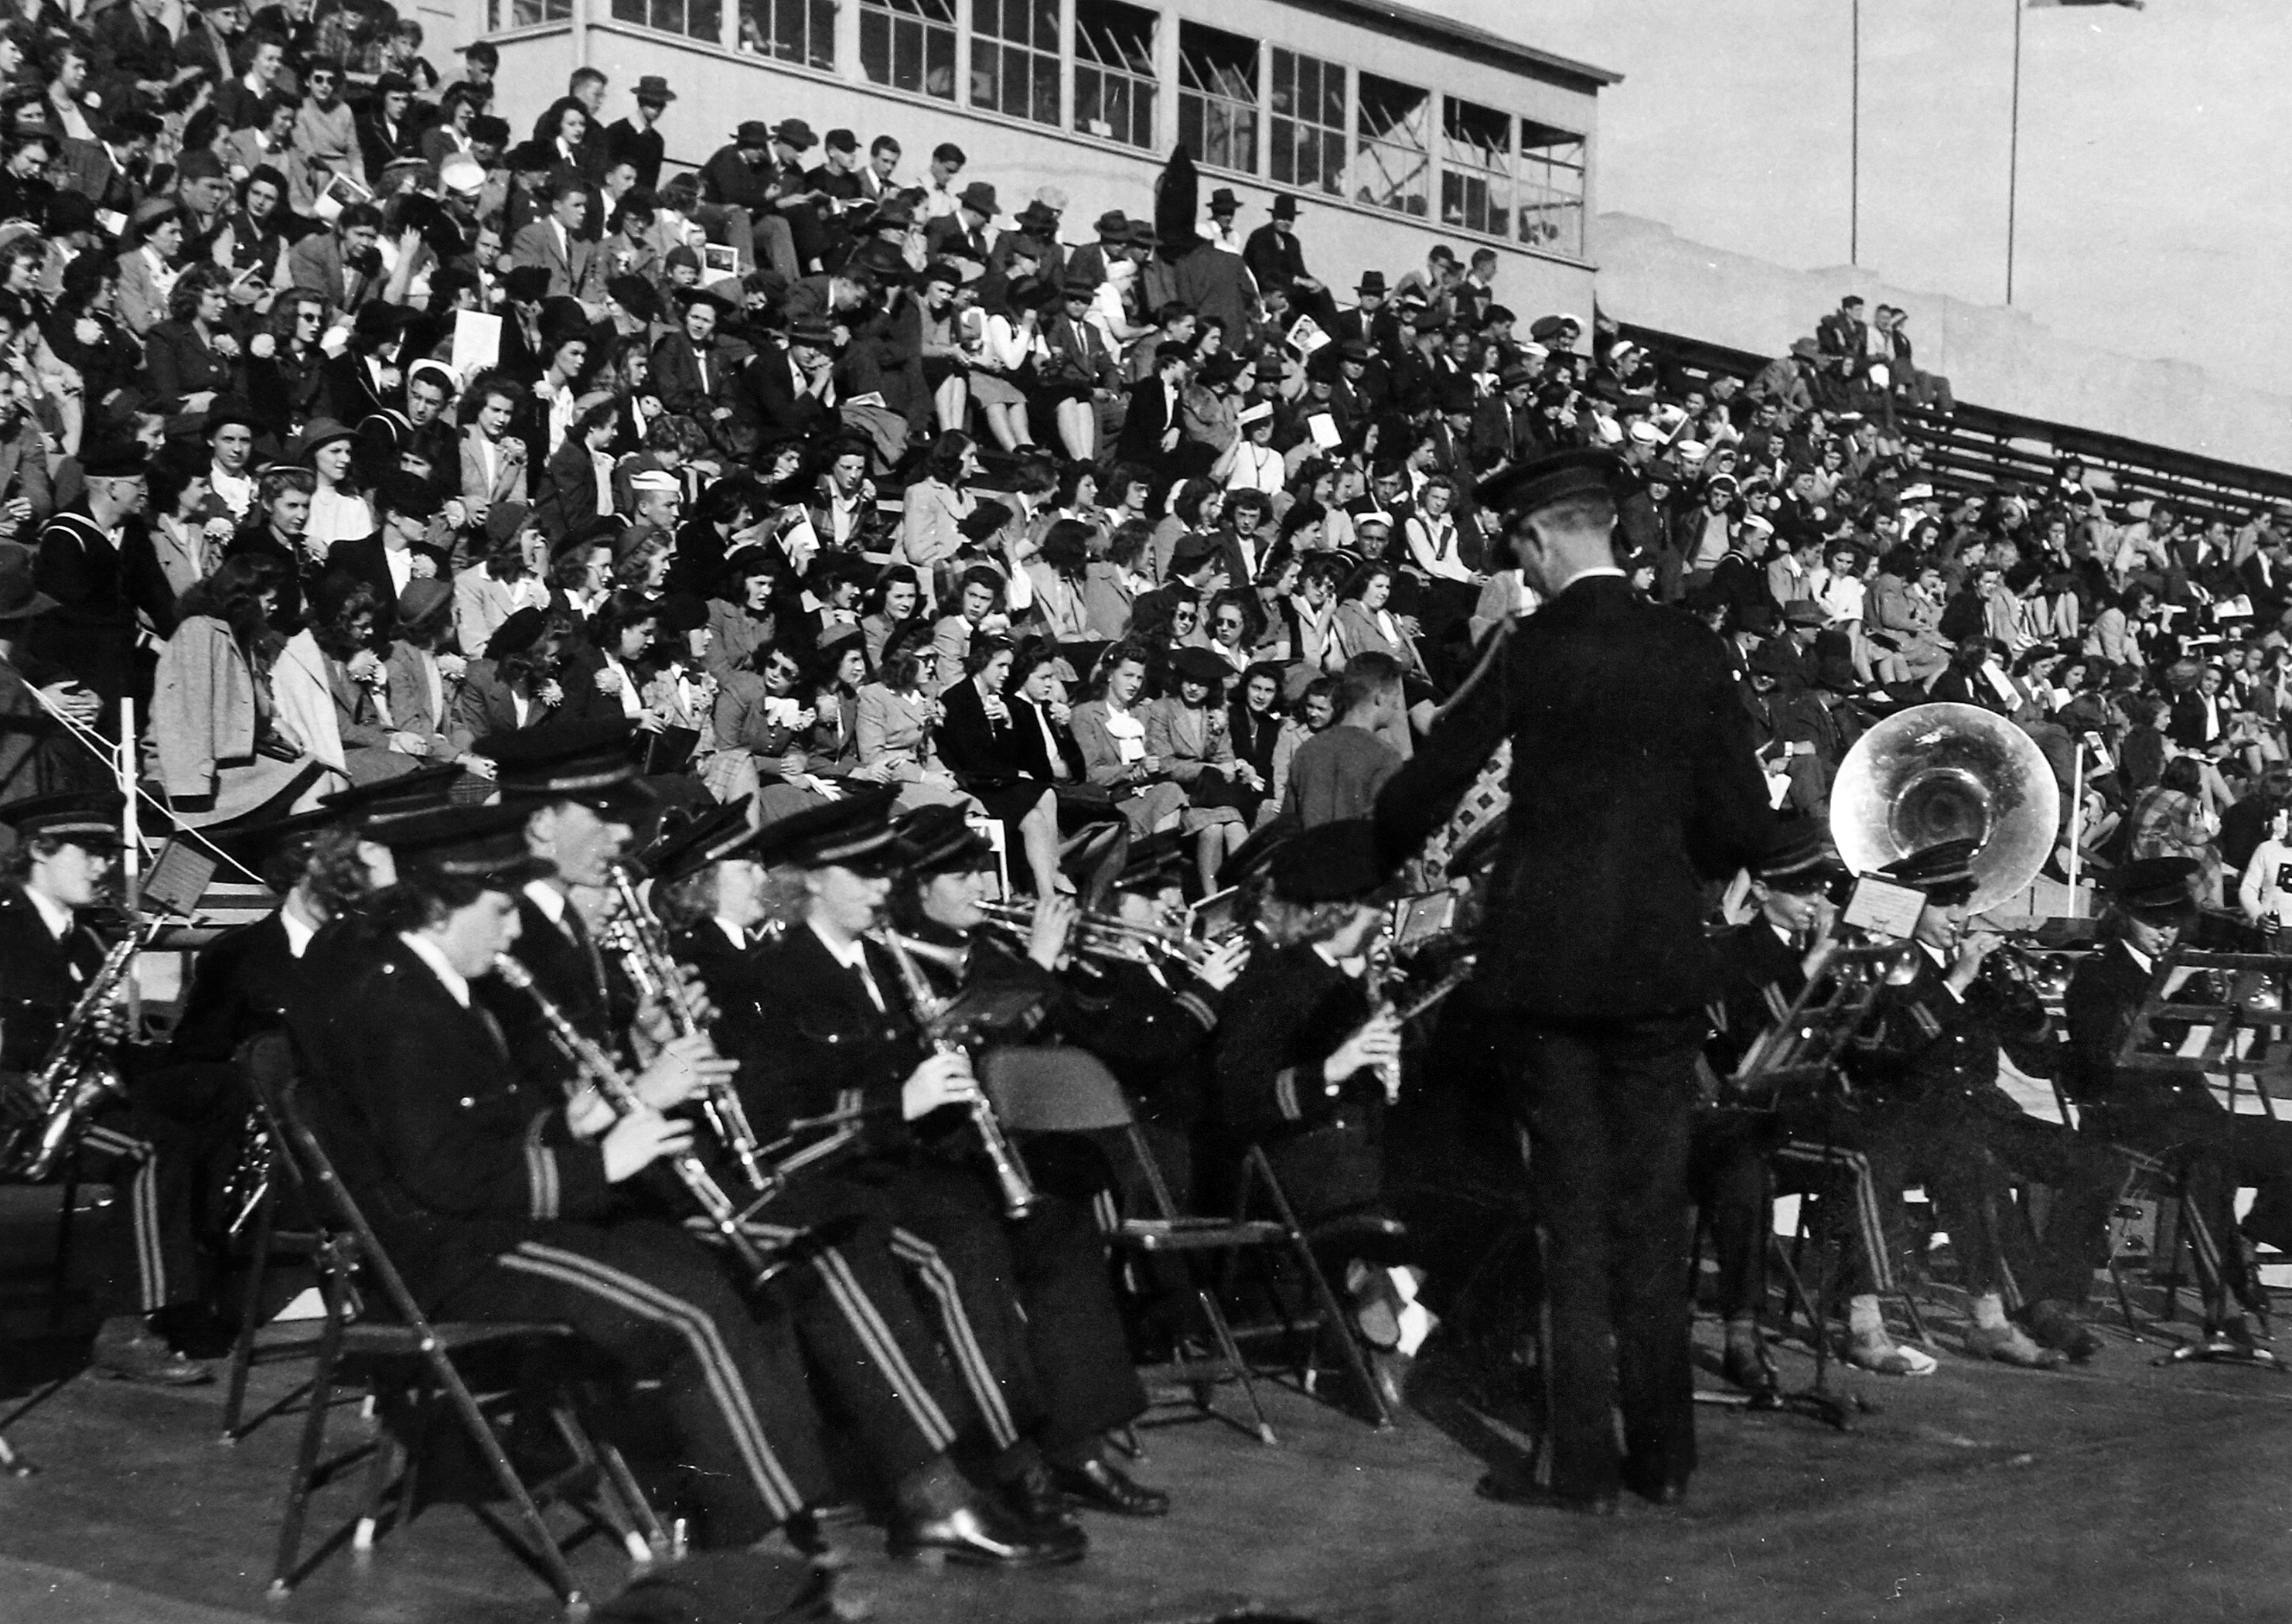 Historic photo shows members of the BGSU band seated and playing at Doyt L. Perry Stadium in 1944 while fans fill the stands above them.